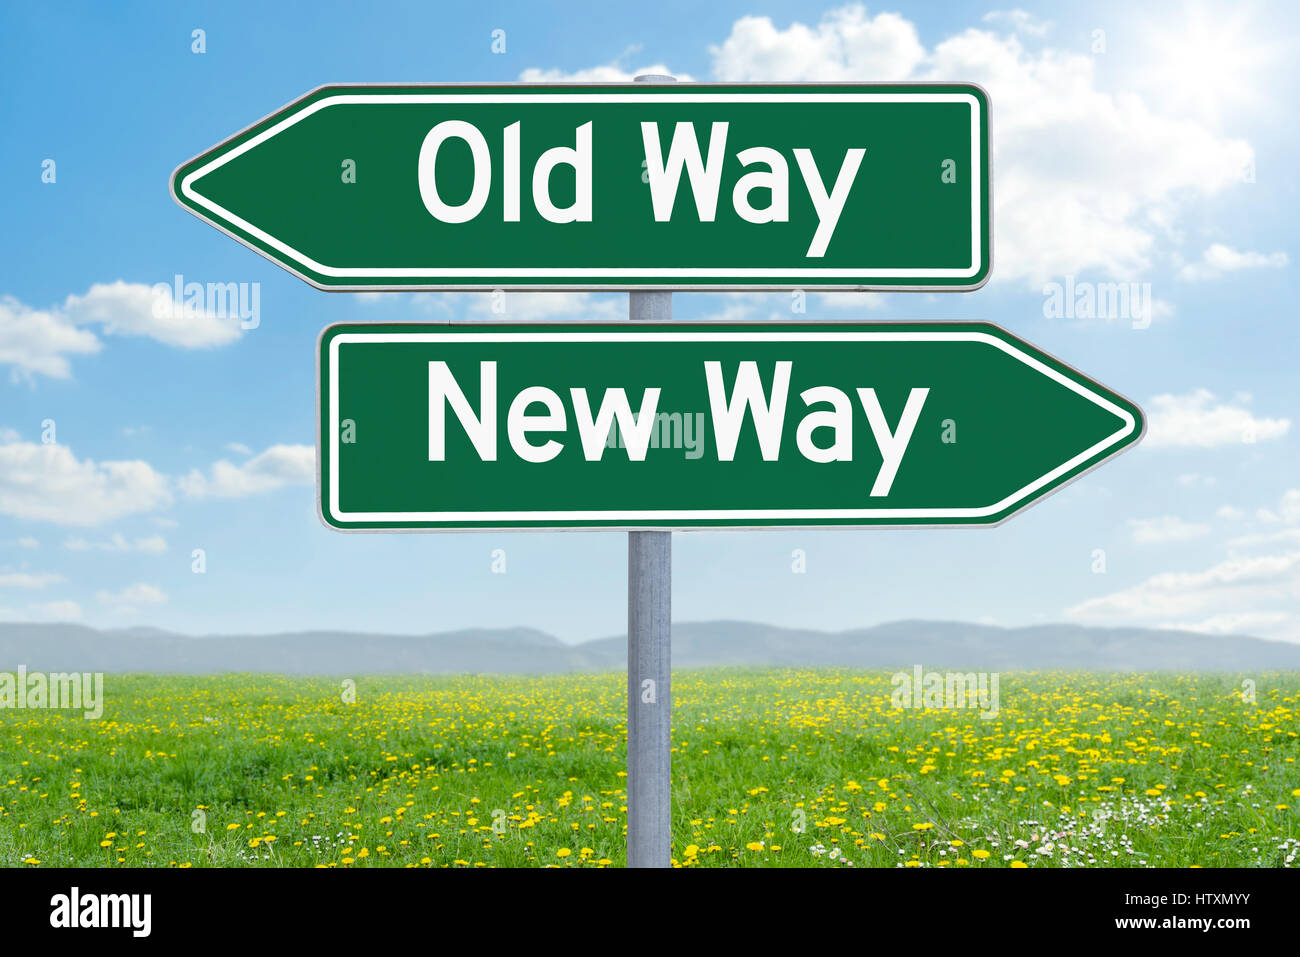 Two green direction signs - Old Way or New Way Stock Photo: 135811535